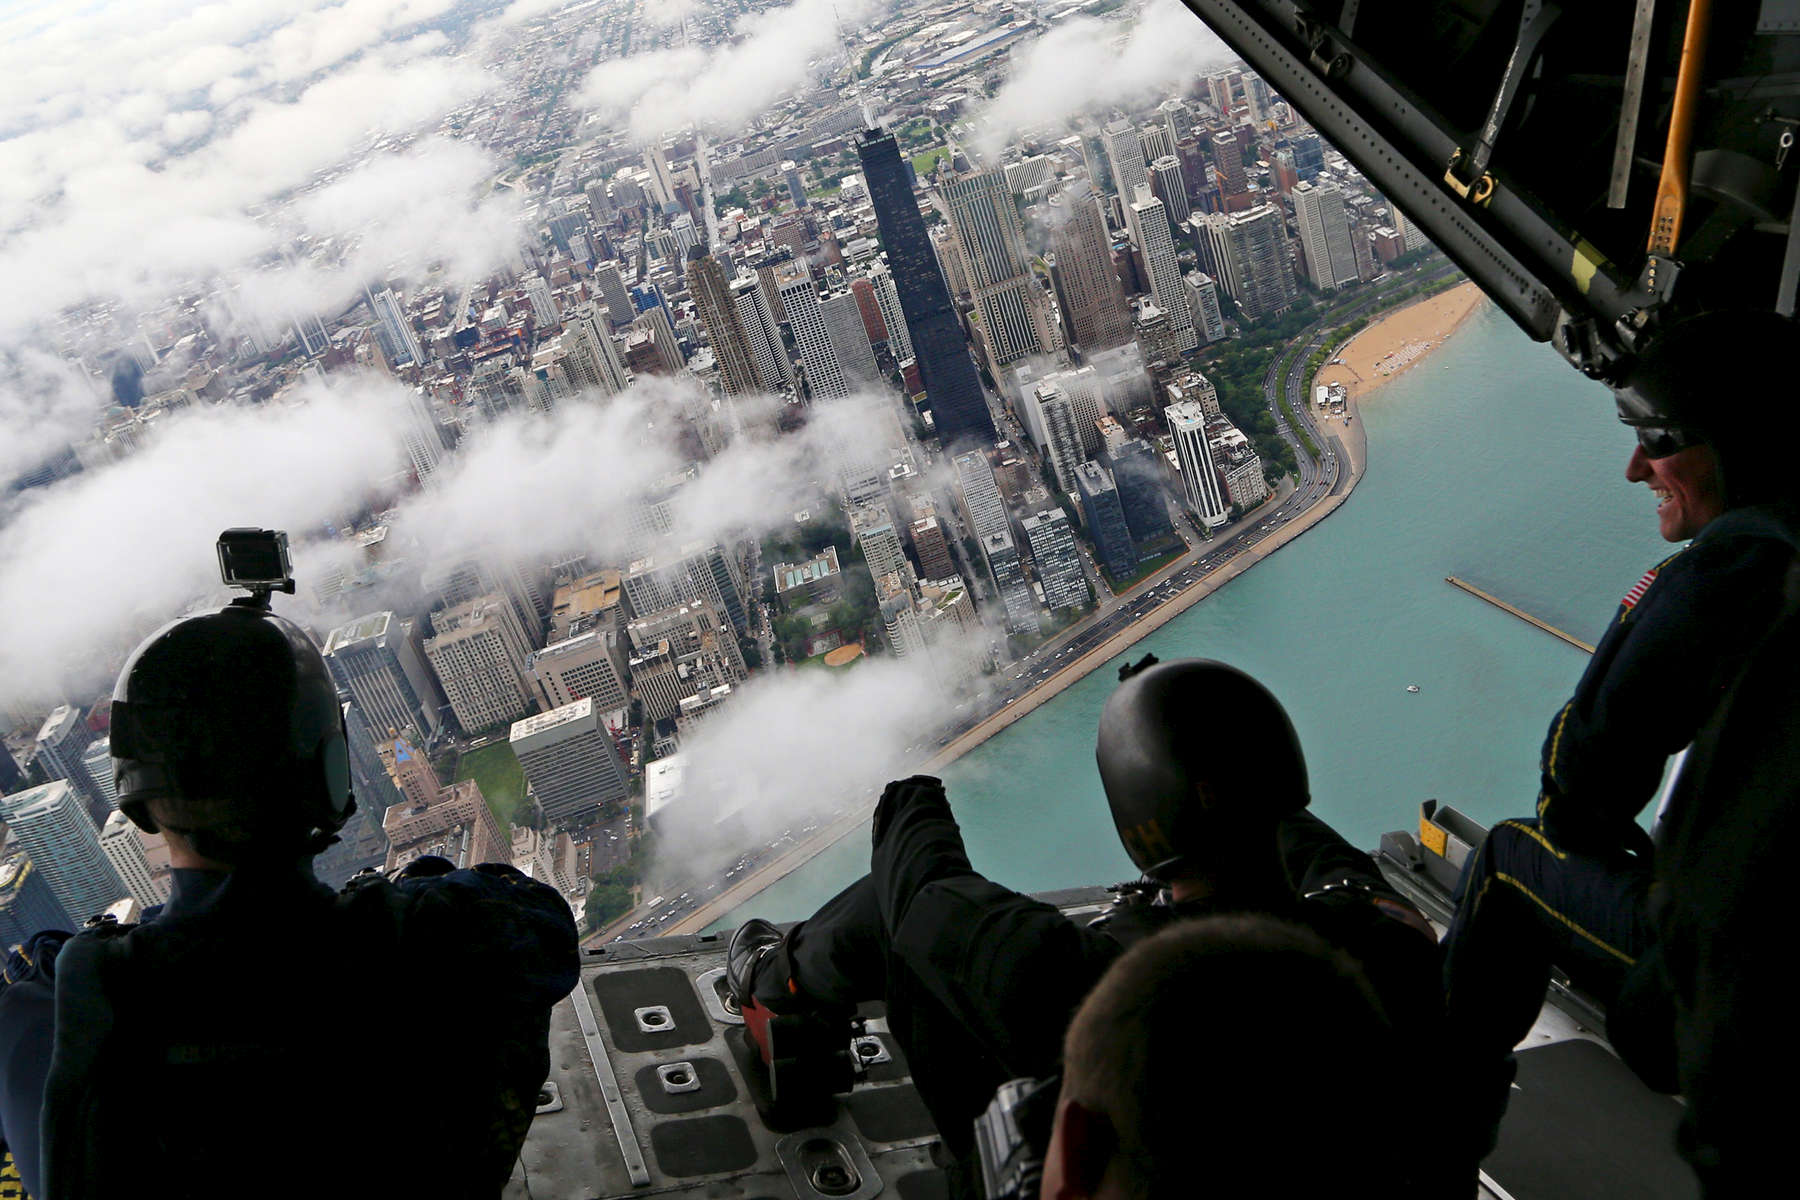 Members of the Navy's Leap Frogs and Army's Golden Knights parachute teams took in the view from the back of a C130h airplane as it flew over the John Hancock Center en route to the annual Air and Water Show in Chicago. 